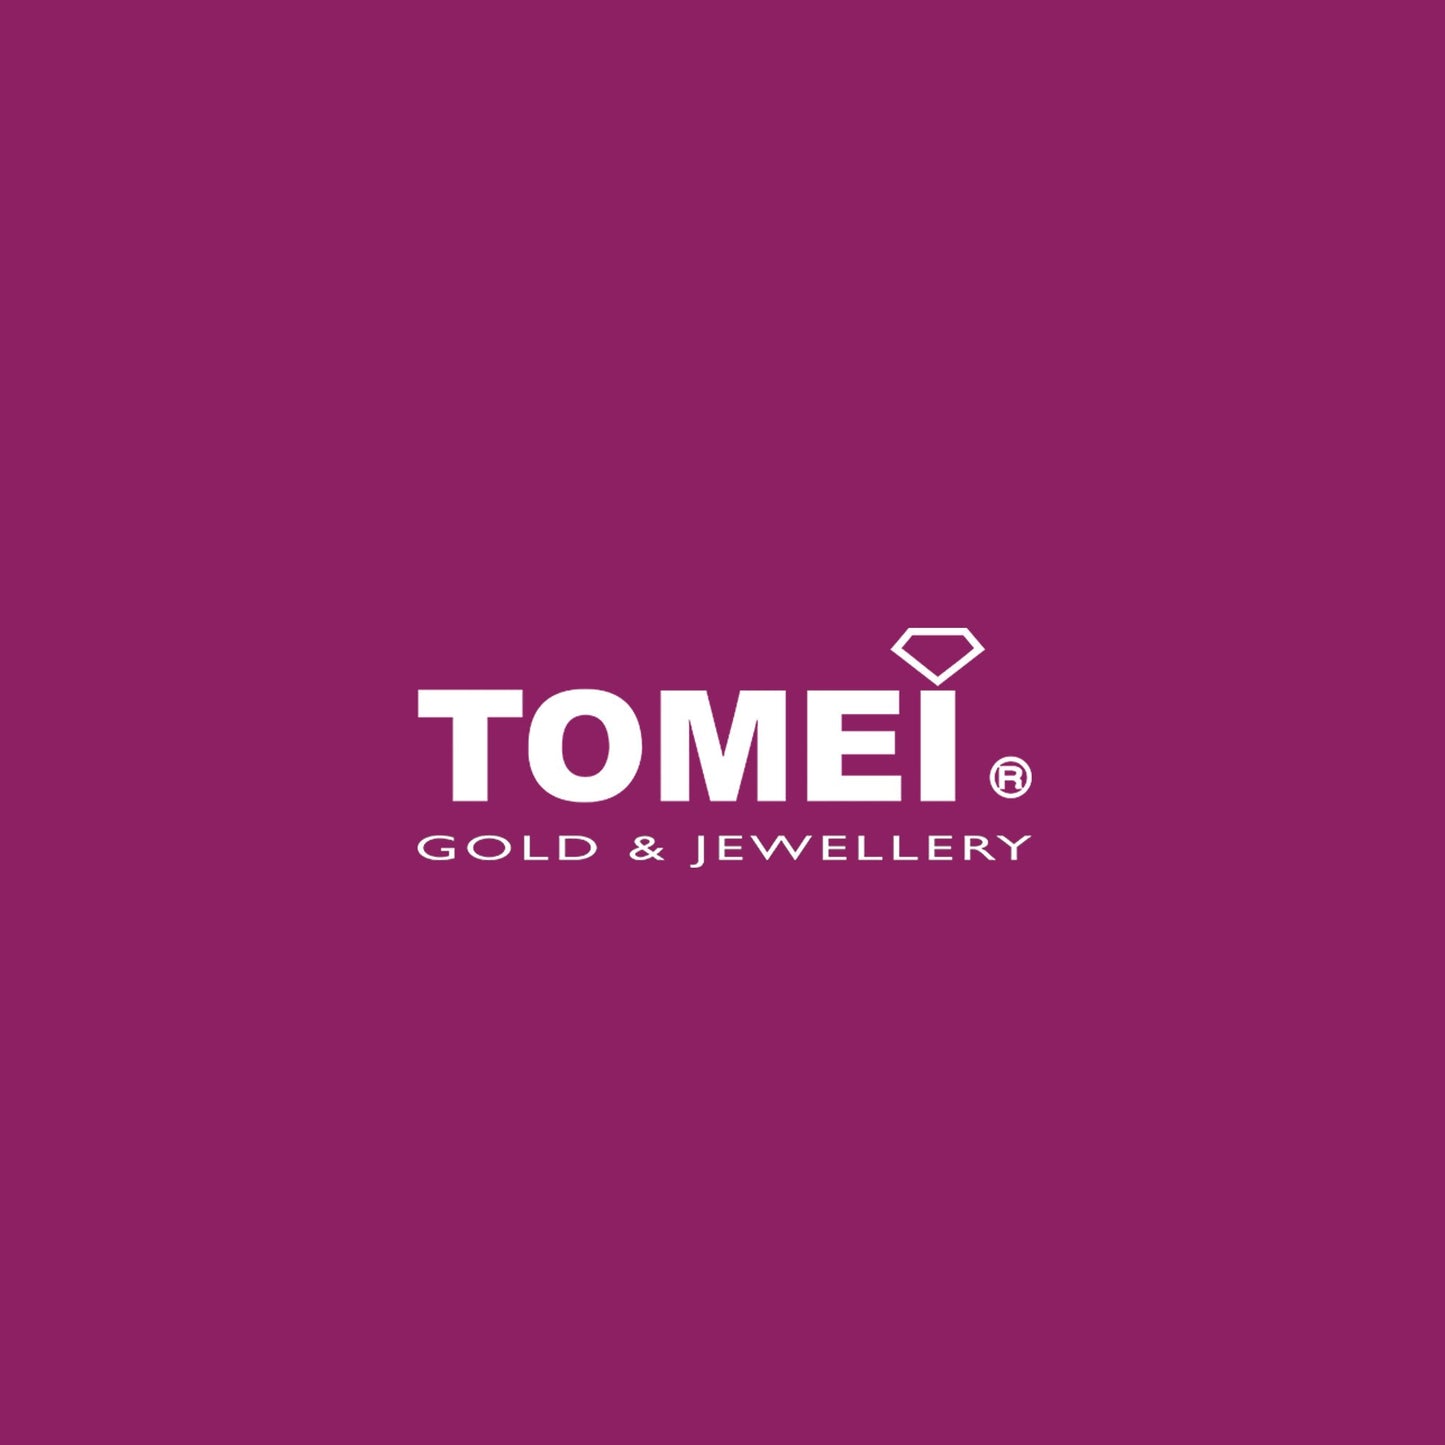 TOMEI Be My Wing Diamond Necklace, White Gold 375 (B0879)